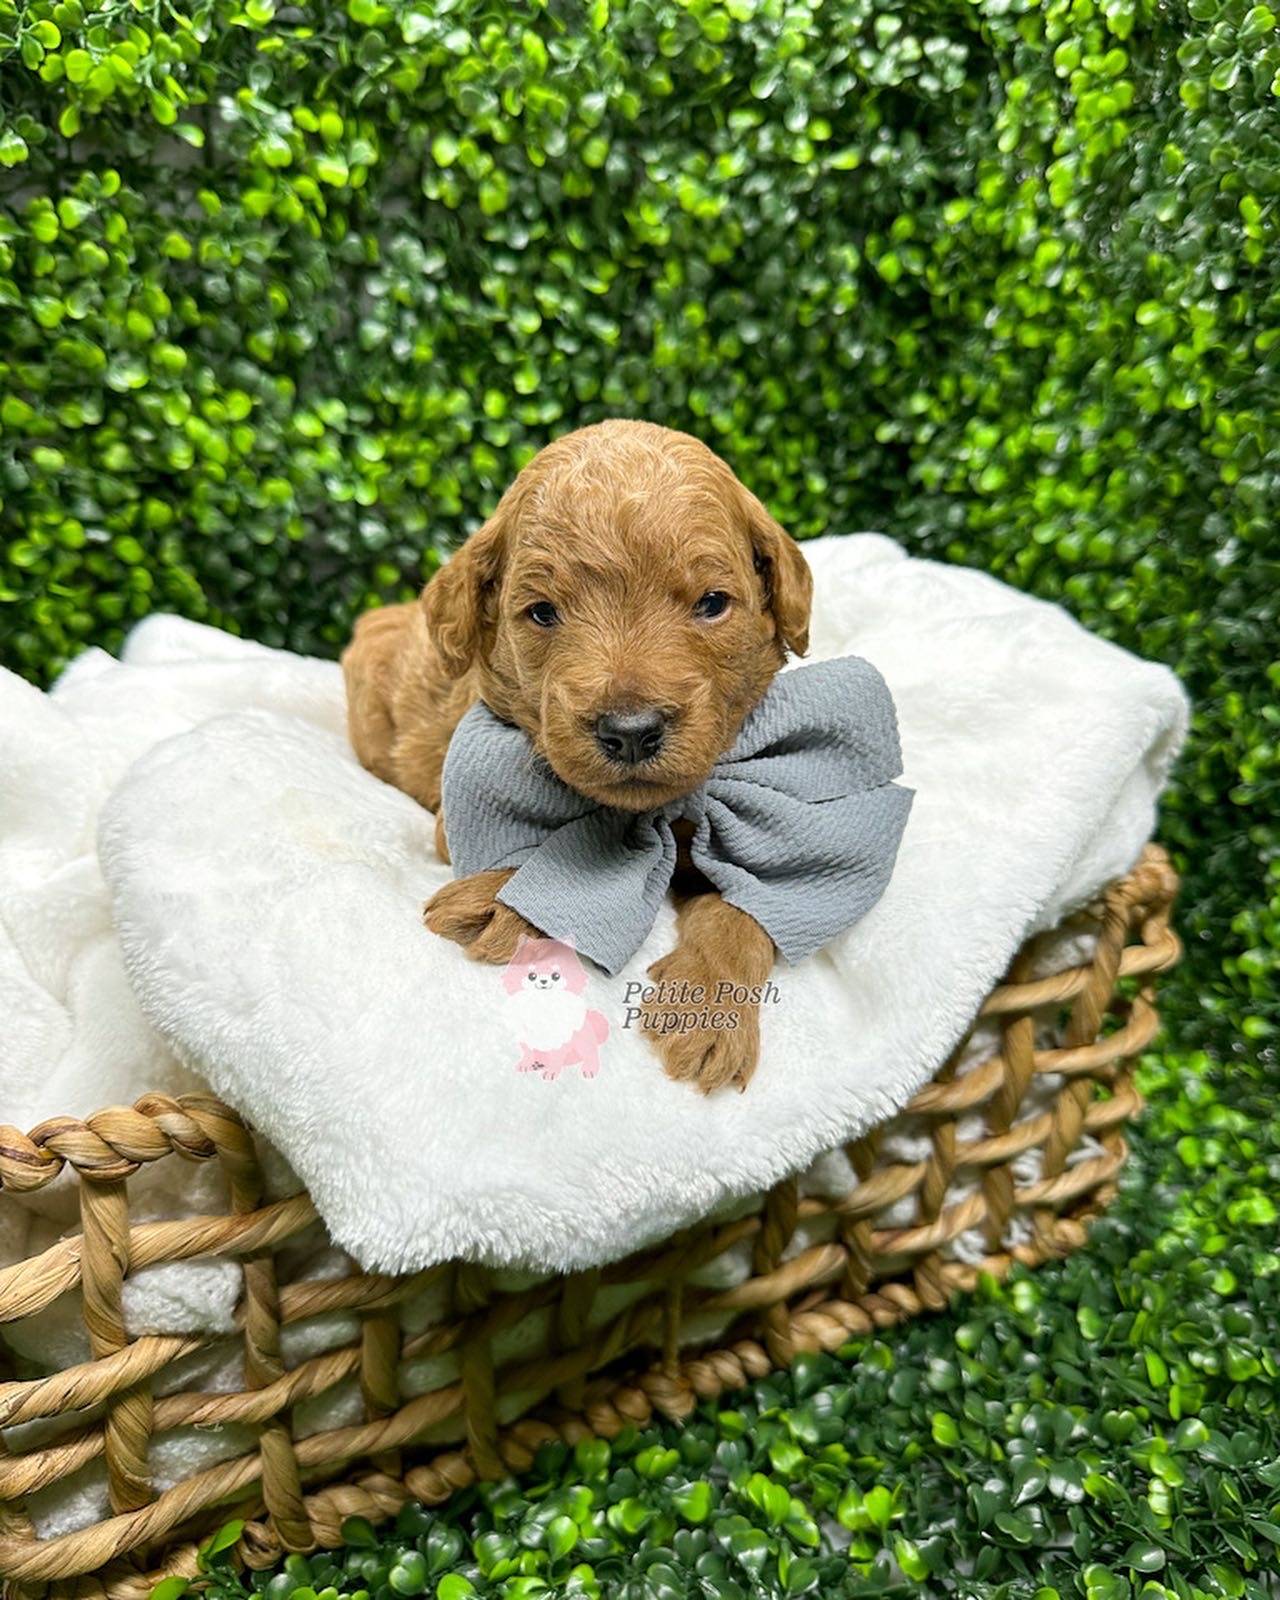 Beau-Red-Apricot-FB-Toy-Goldendoodle-Petite-Posh-Puppies-